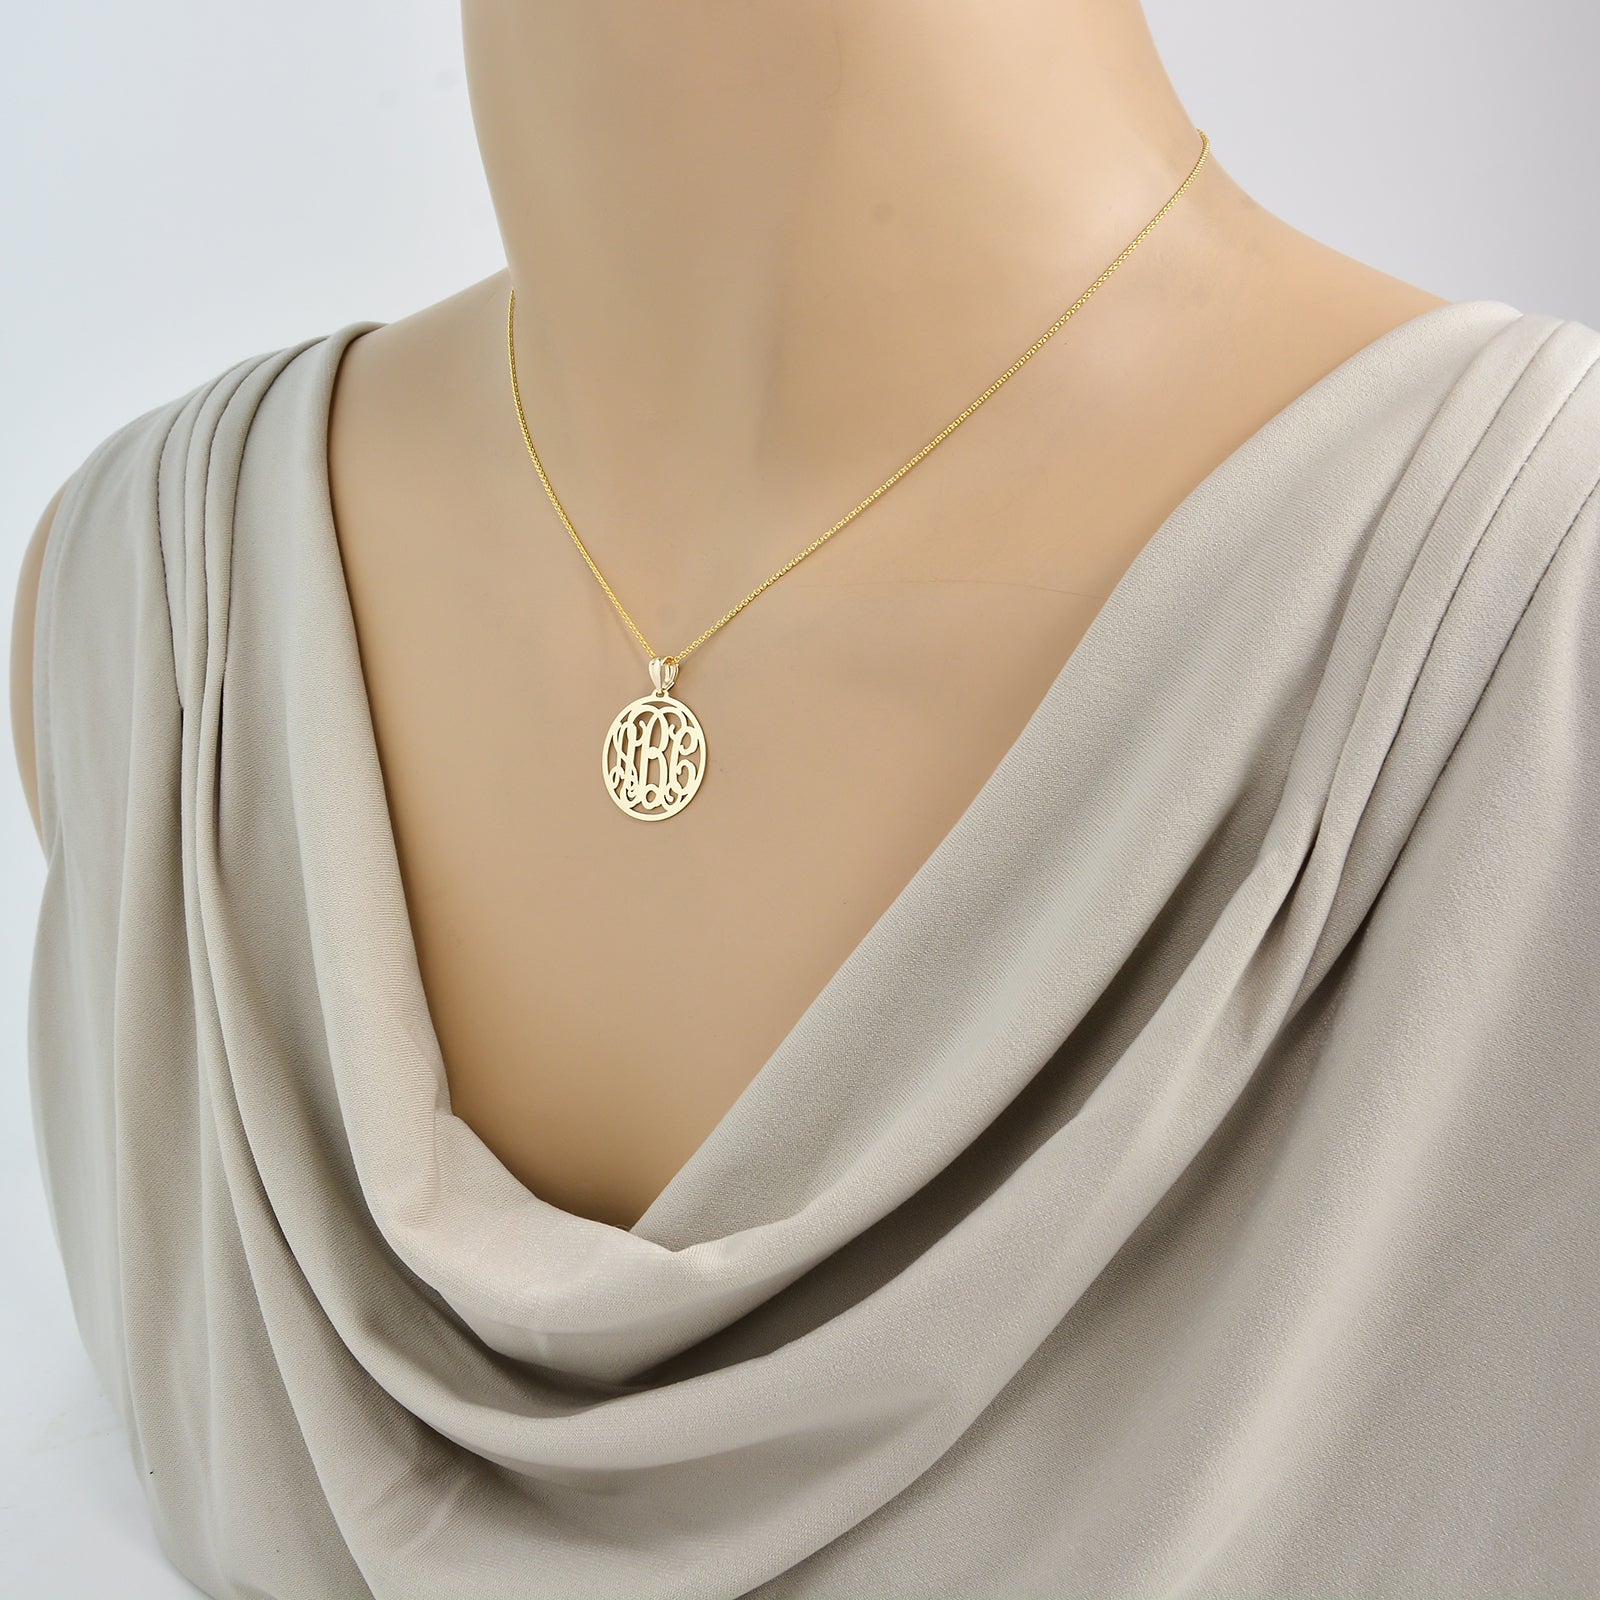 30mm Gold Plated Circle Monogram Pendant Necklace